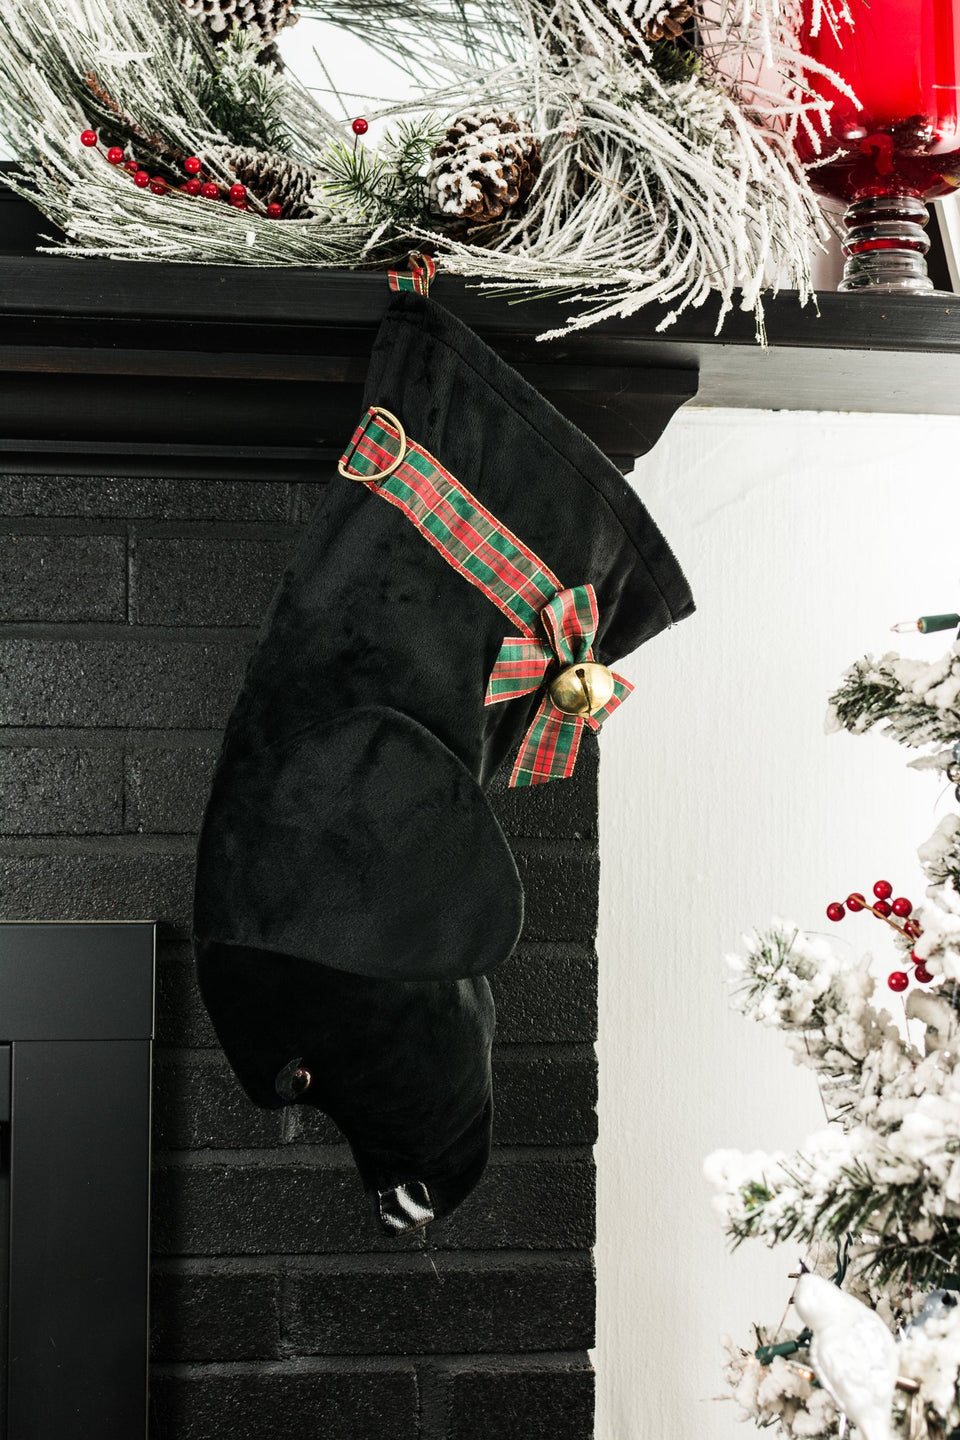 This Black Lab shaped Christmas dog stocking is perfect for stuffing toys and treats into to spoil your fur baby for Christmas, or whatever holiday you celebrate!